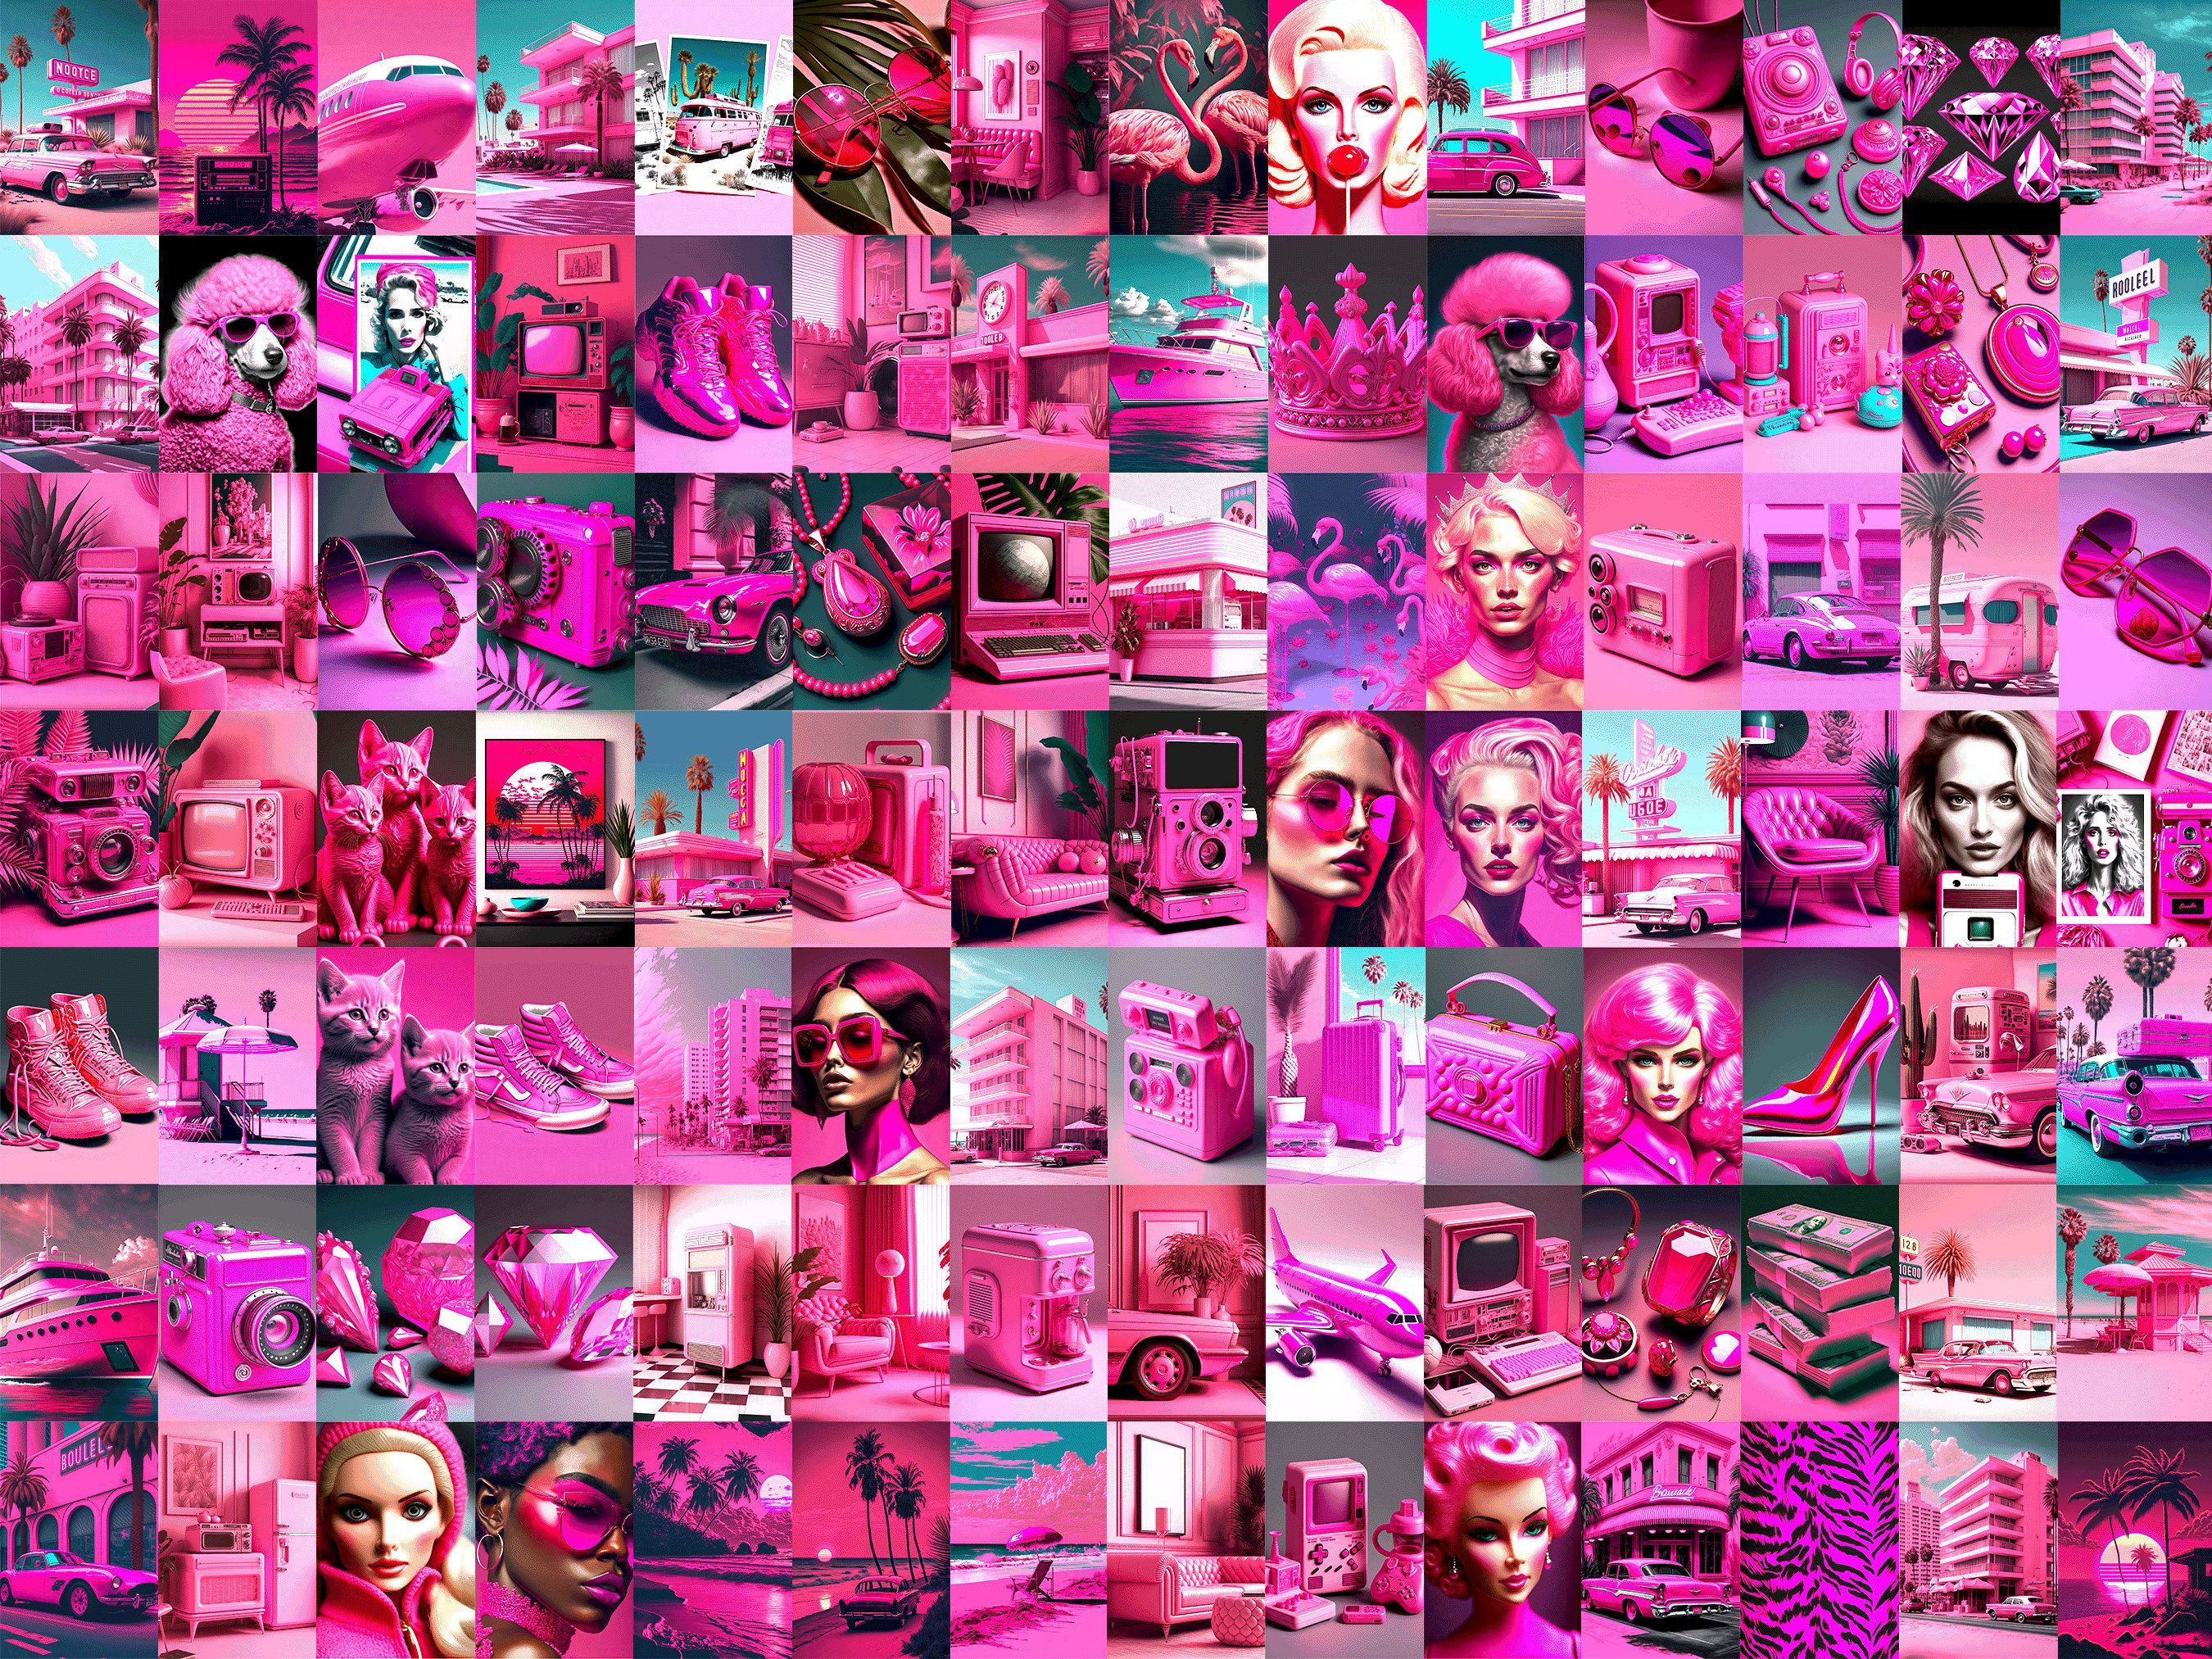 Retro Hot Pink Aesthetic Wall Collage Kit 180 PCS Pink Vibes